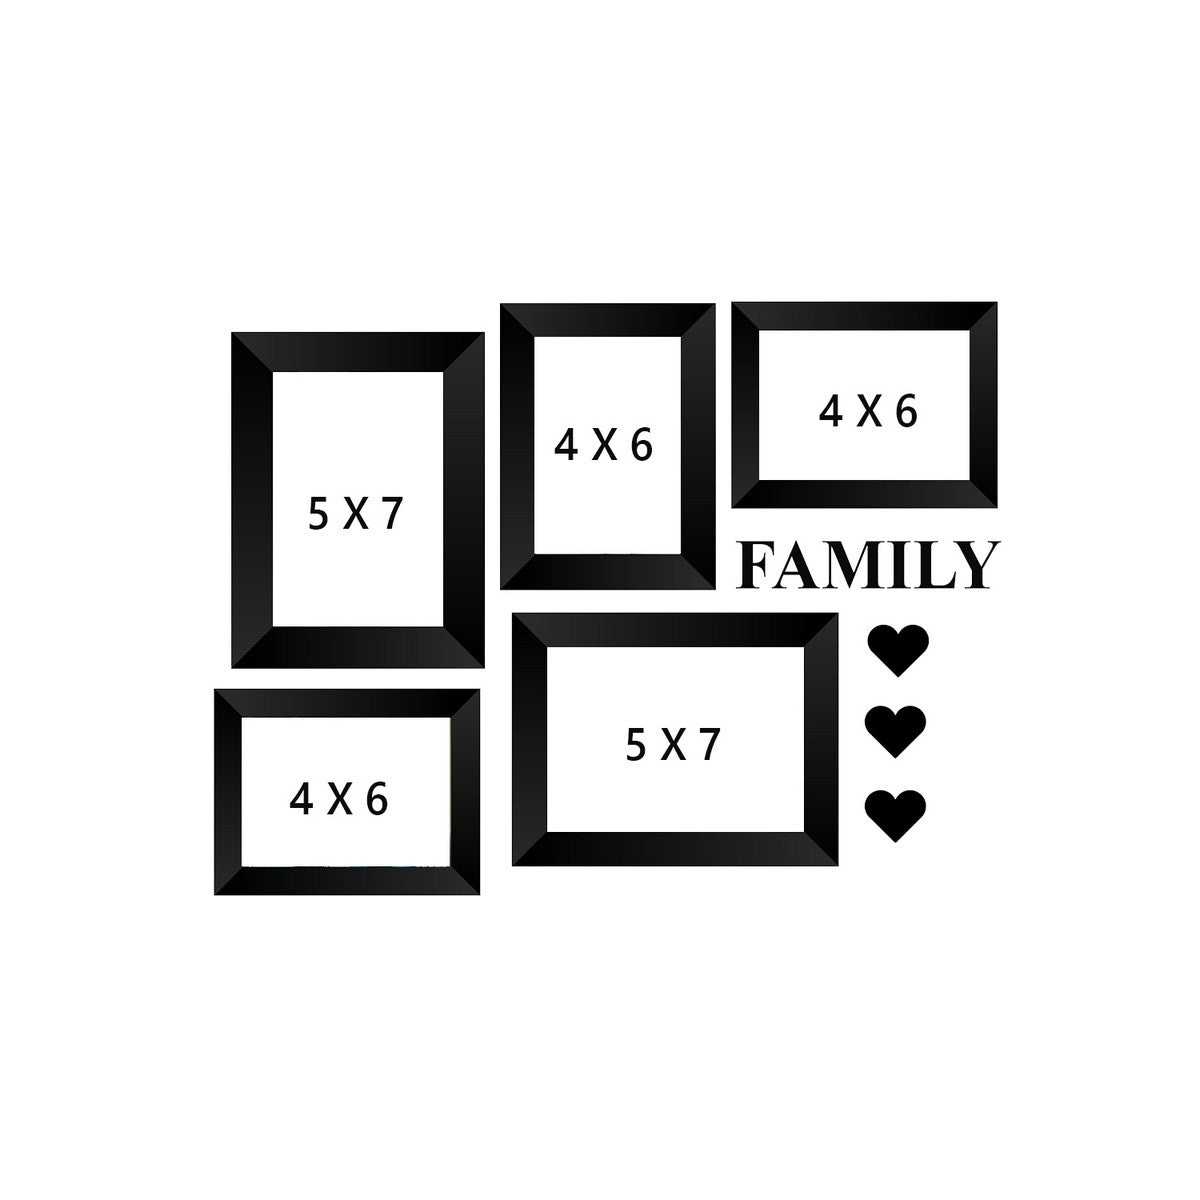 Memory Wall Collage Photo Frame - Set of 5 Photo Frames for 3 Photos of 4"x6", 2 Photos of 5"x7", 1 Piece of FAMILY, 3 Pieces of HEARTS 3